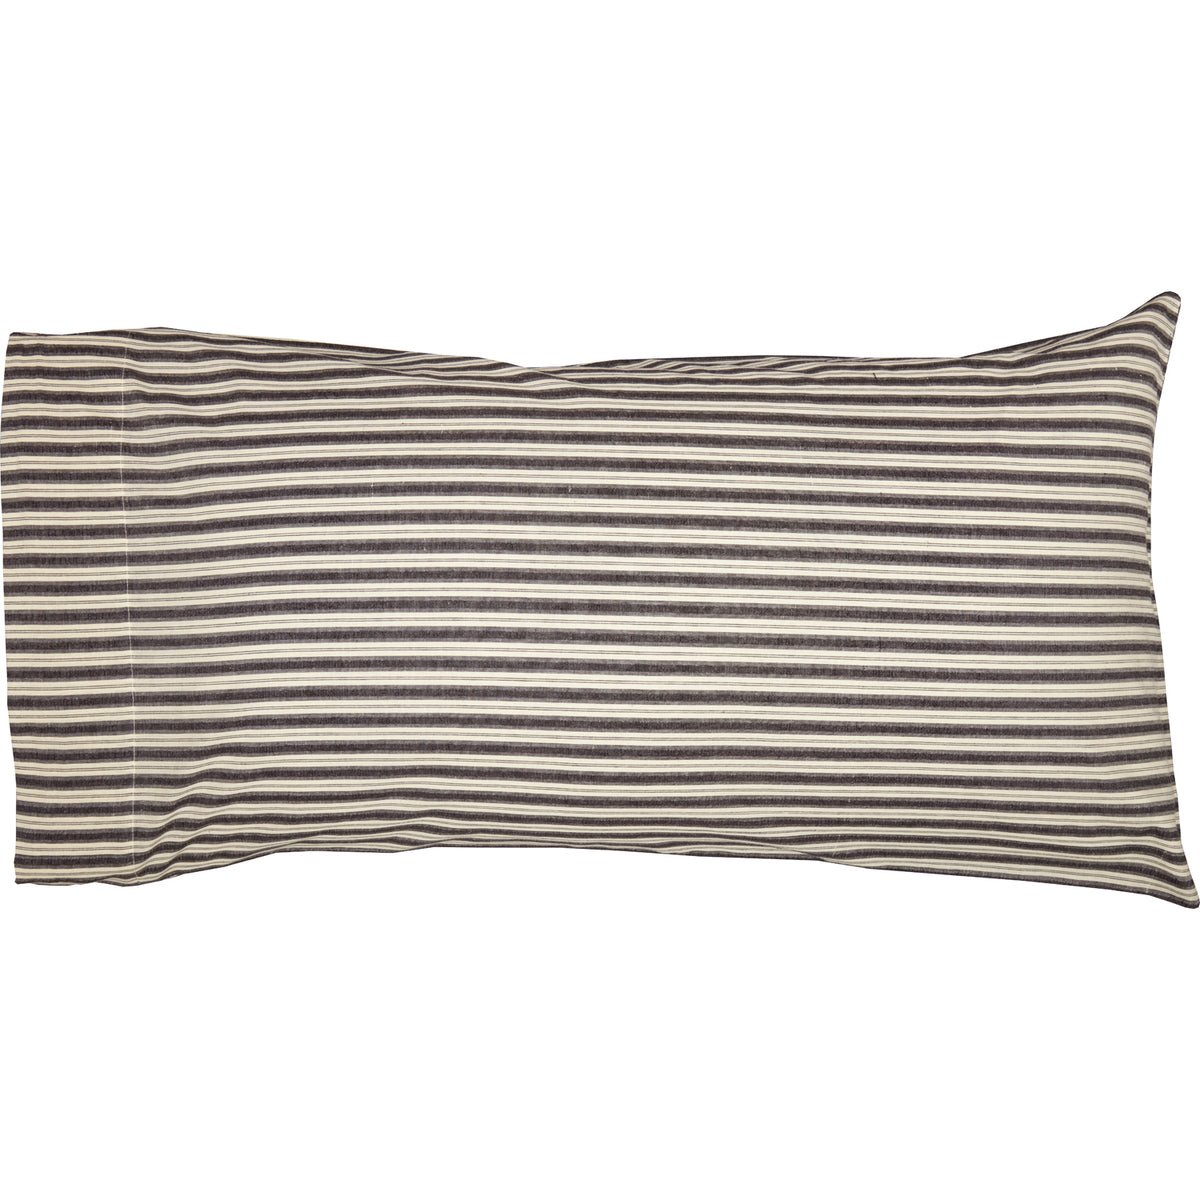 April & Olive Ashmont Ticking Stripe King Pillow Case Set of 2 21x40 By VHC Brands